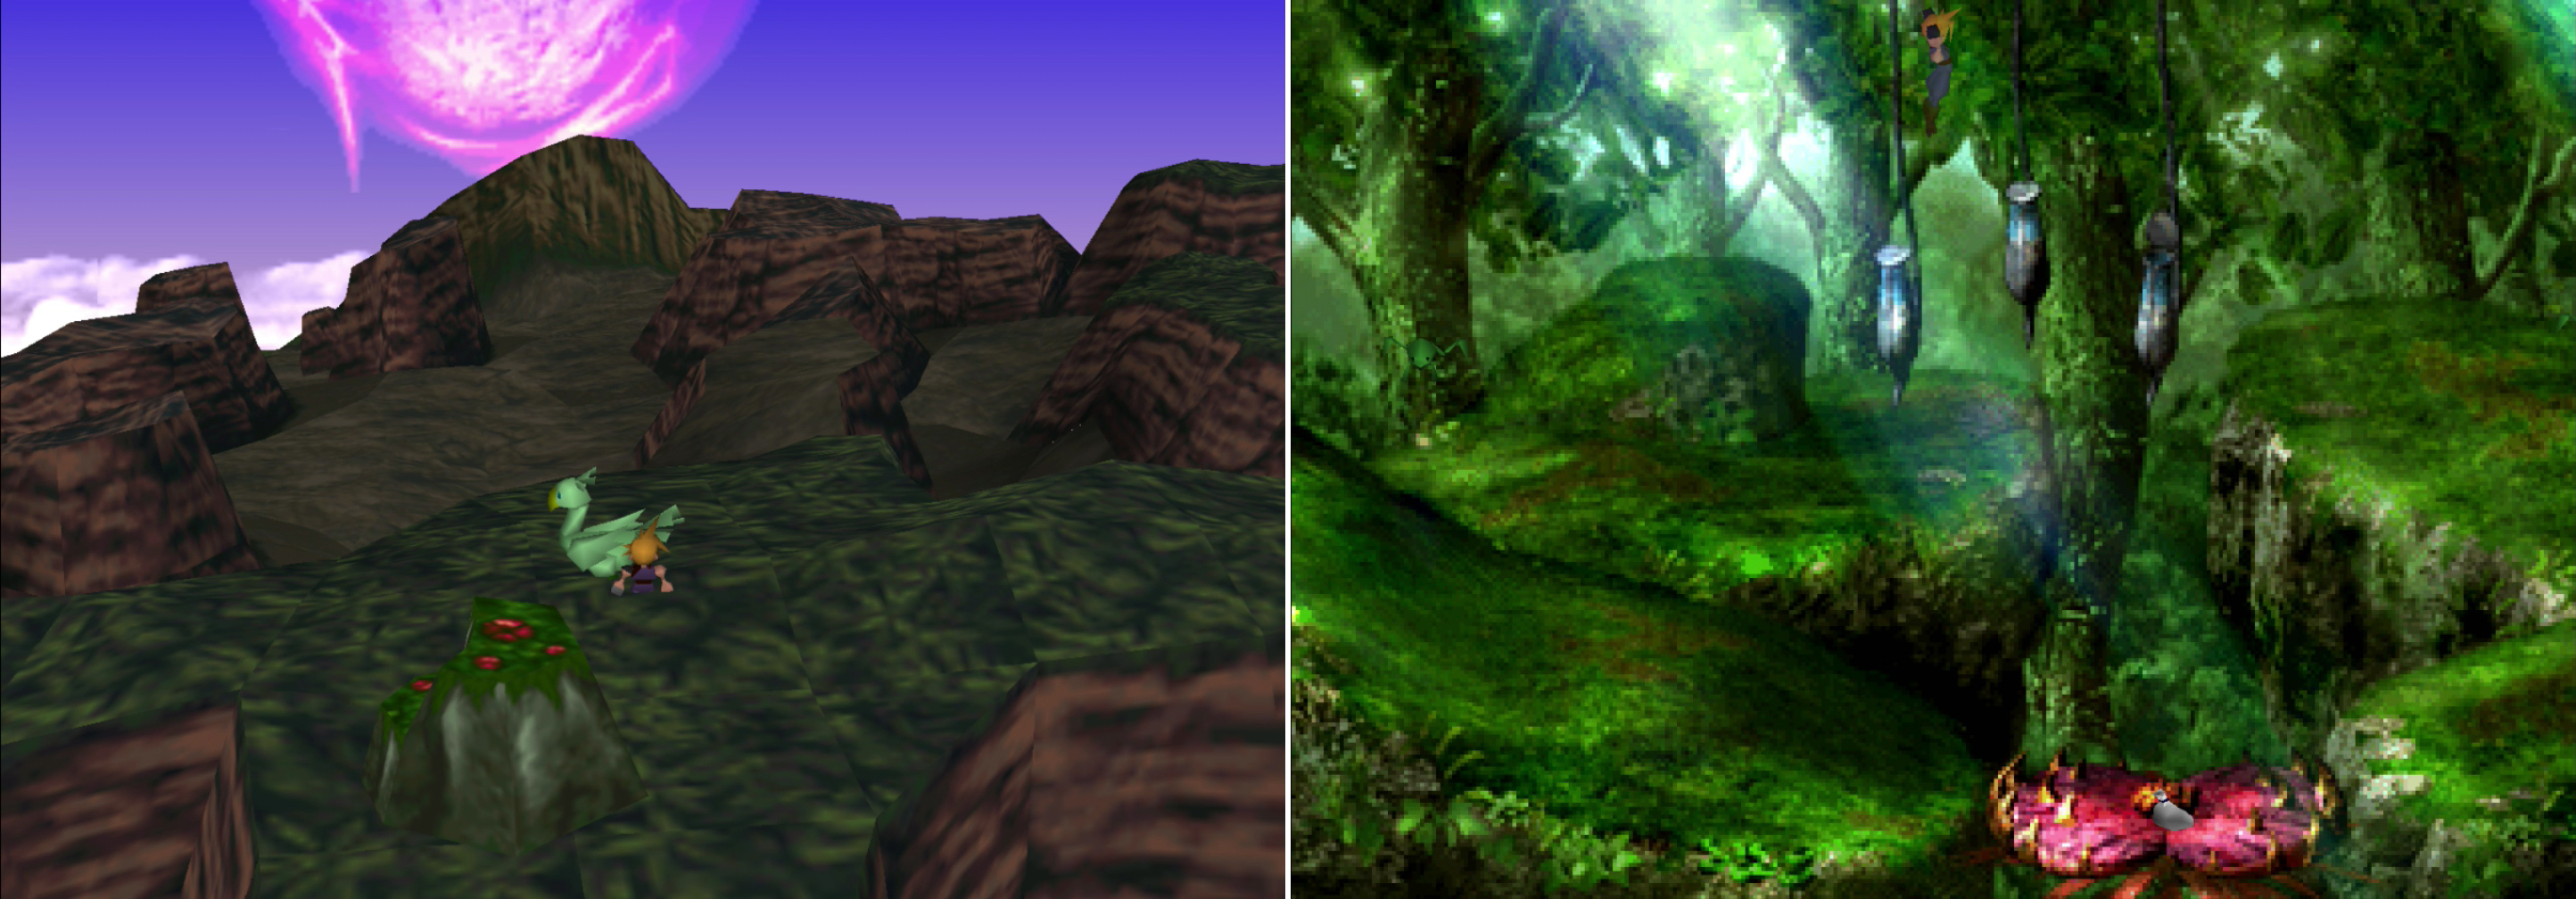 With a Green Chocobo you can find the Ancient Forest on jungle-covered high ground near Cosmo Canyon (left). Toss bugs or frogs in pitcher plants to create platforms you can use to navigate through the forest (right).